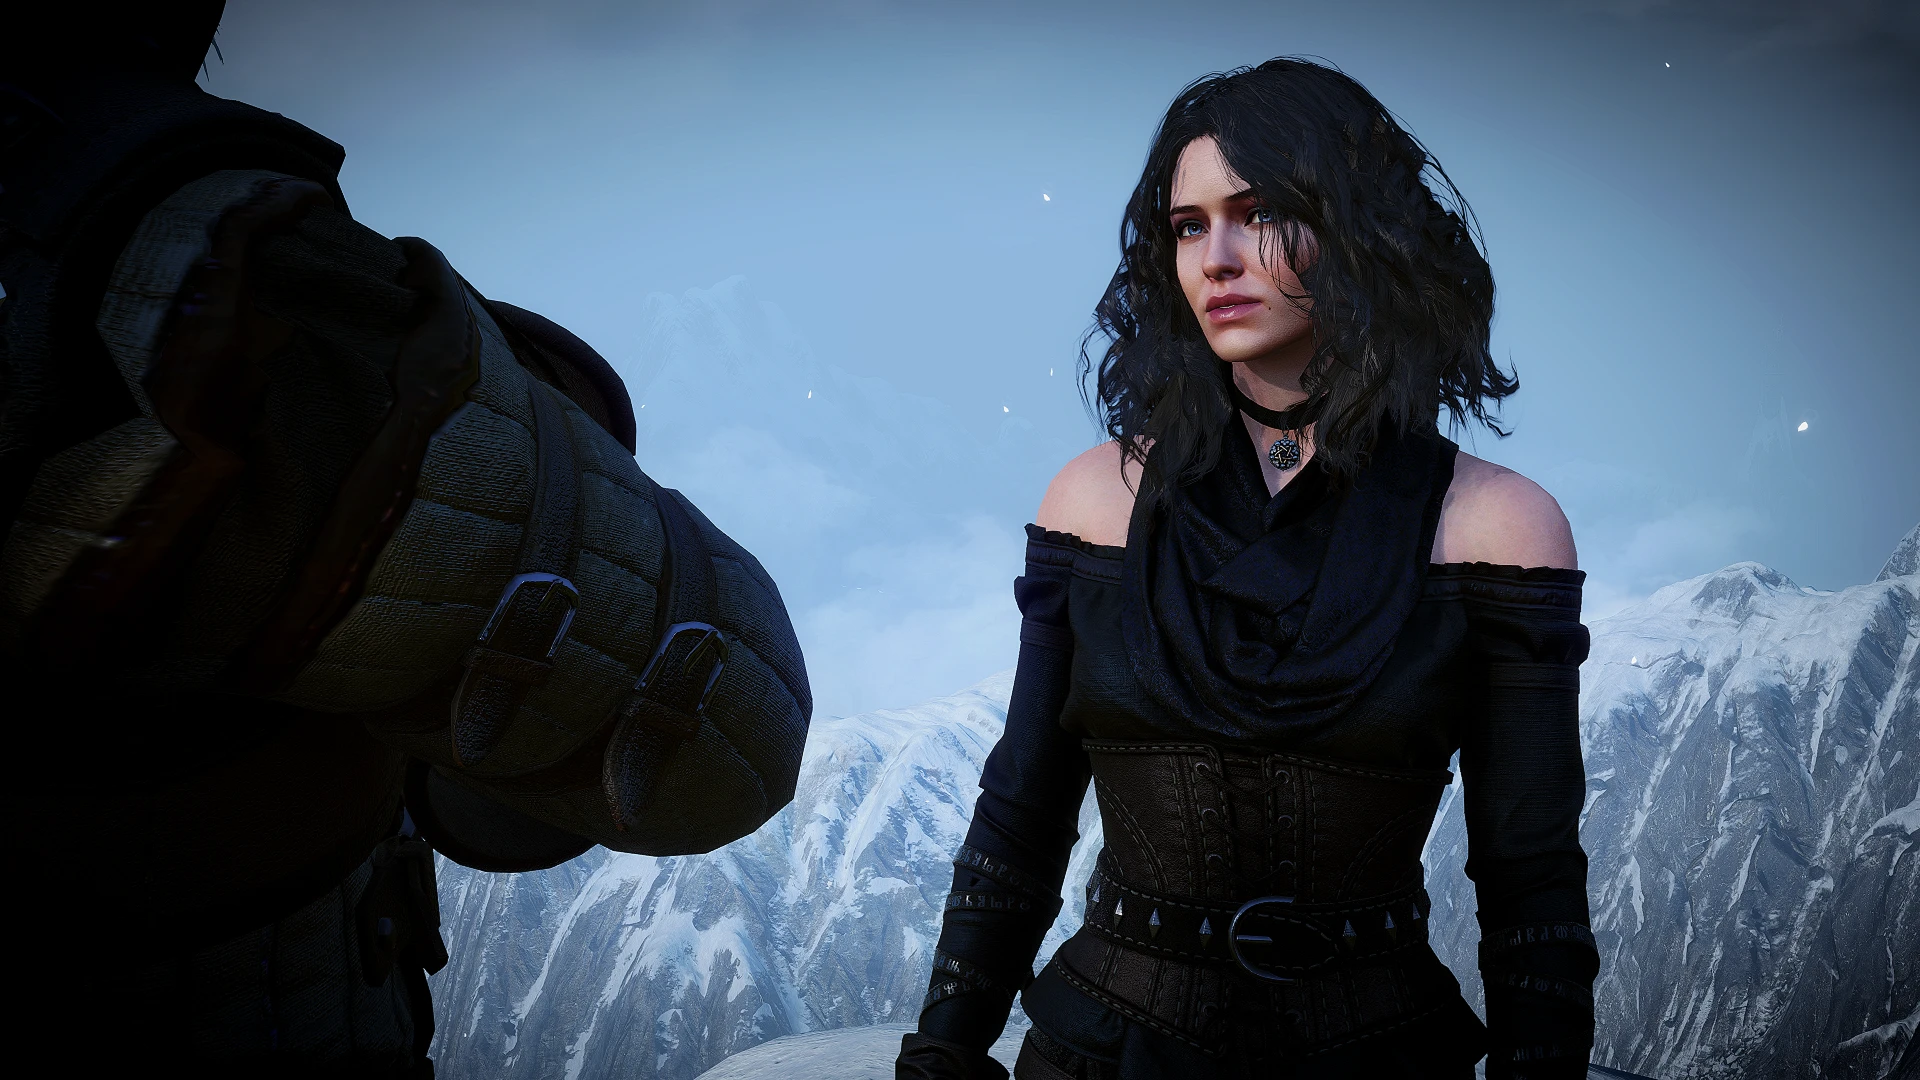 Yennefer of vengerberg the witcher 3 voiced standalone follower se фото 105